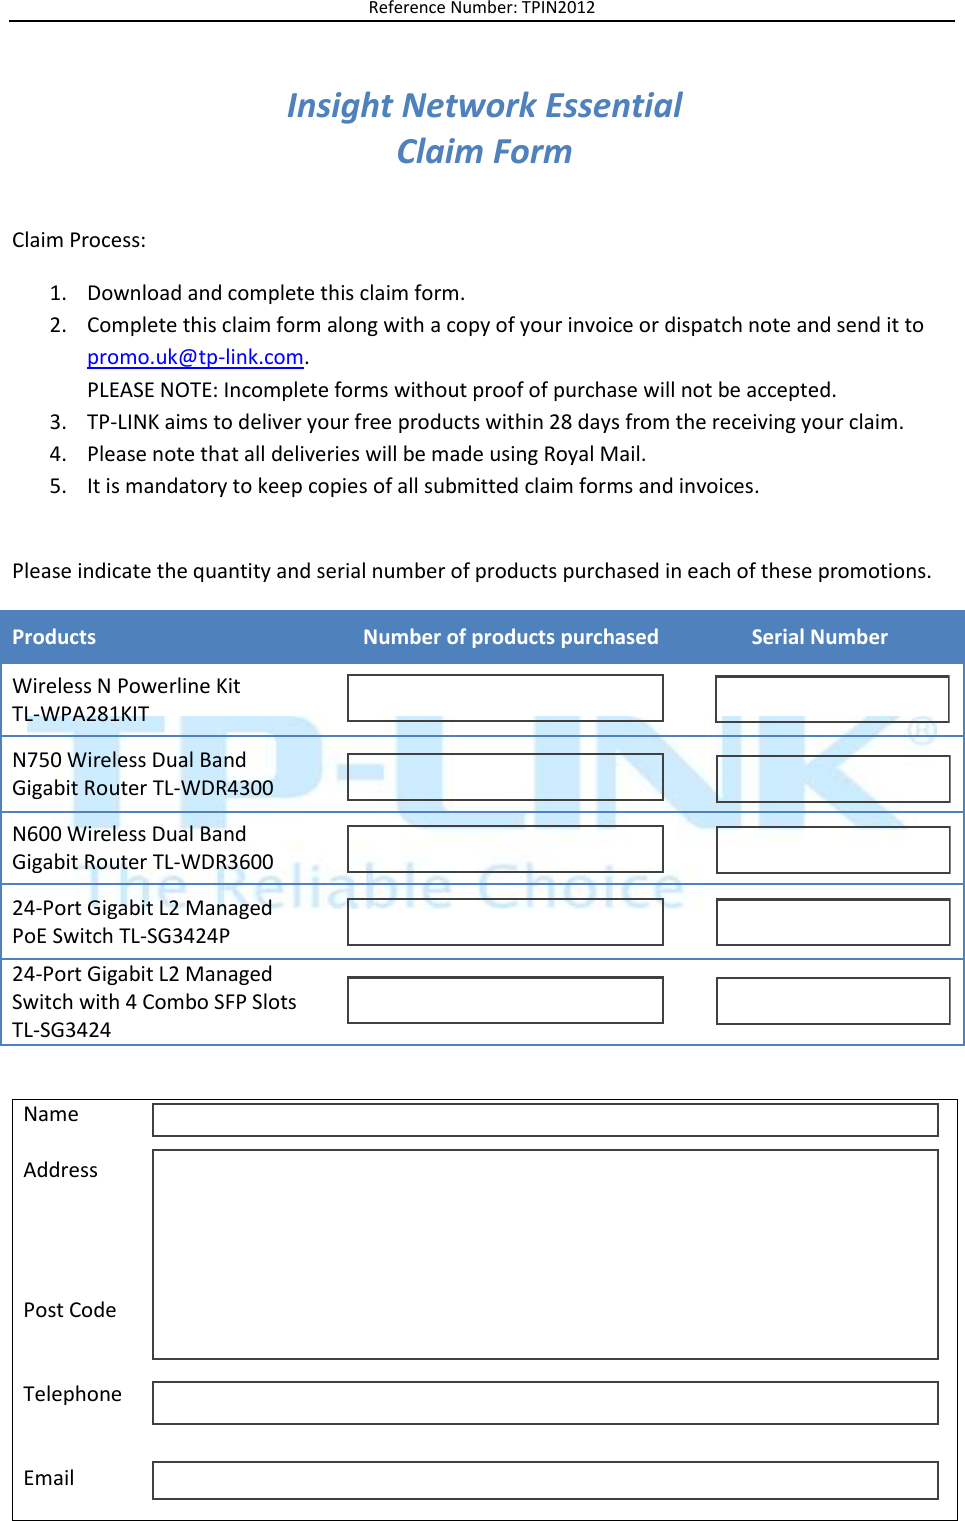 Page 1 of 2 - Insight-catalogue-claim-form